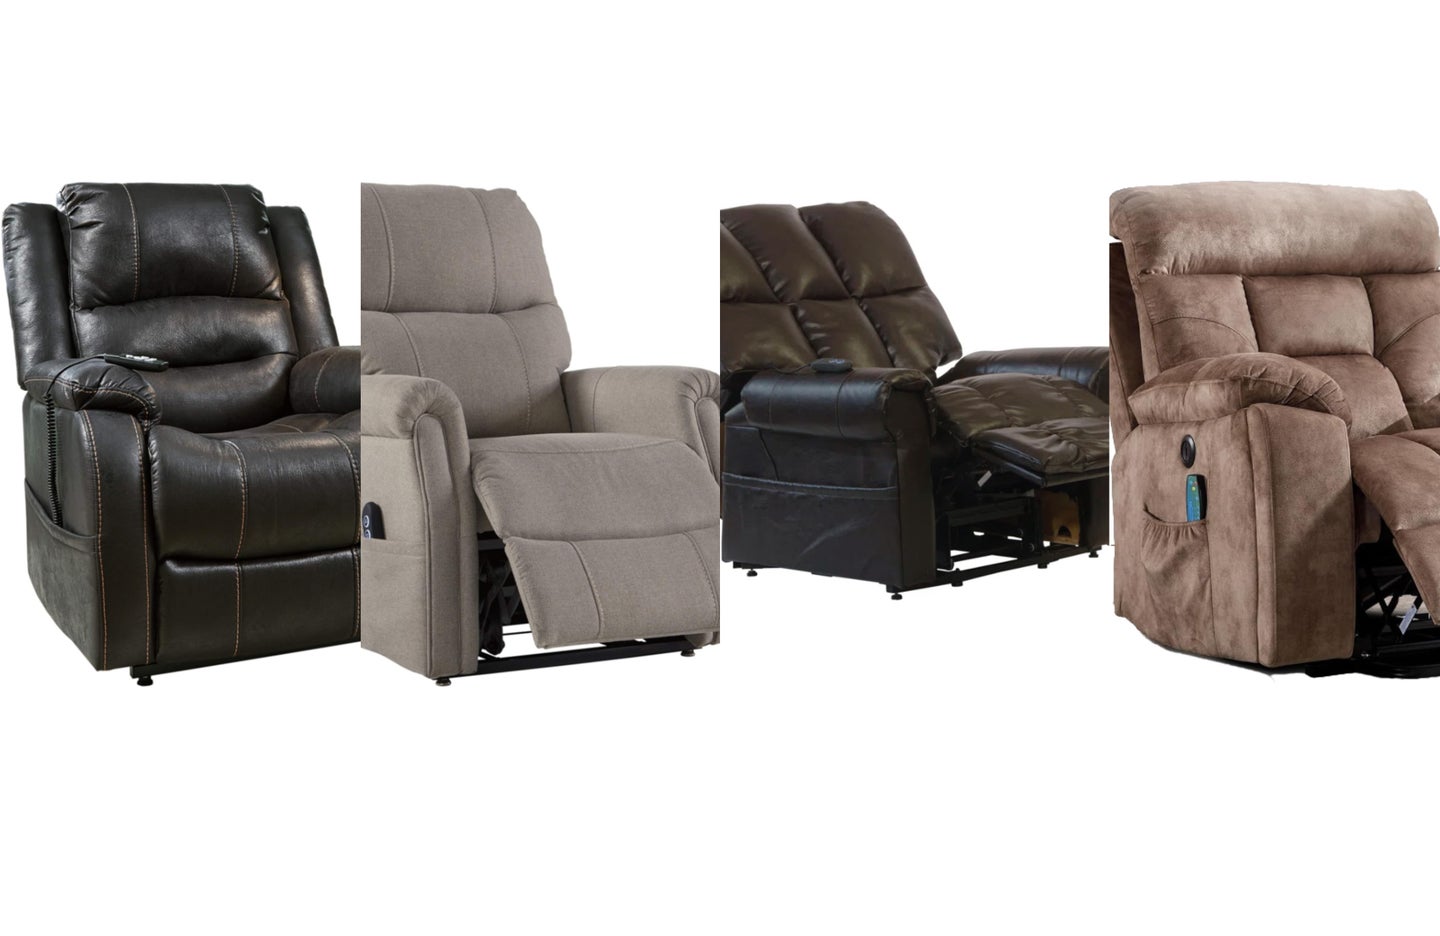 The best recliners for seniors on a plain white background.